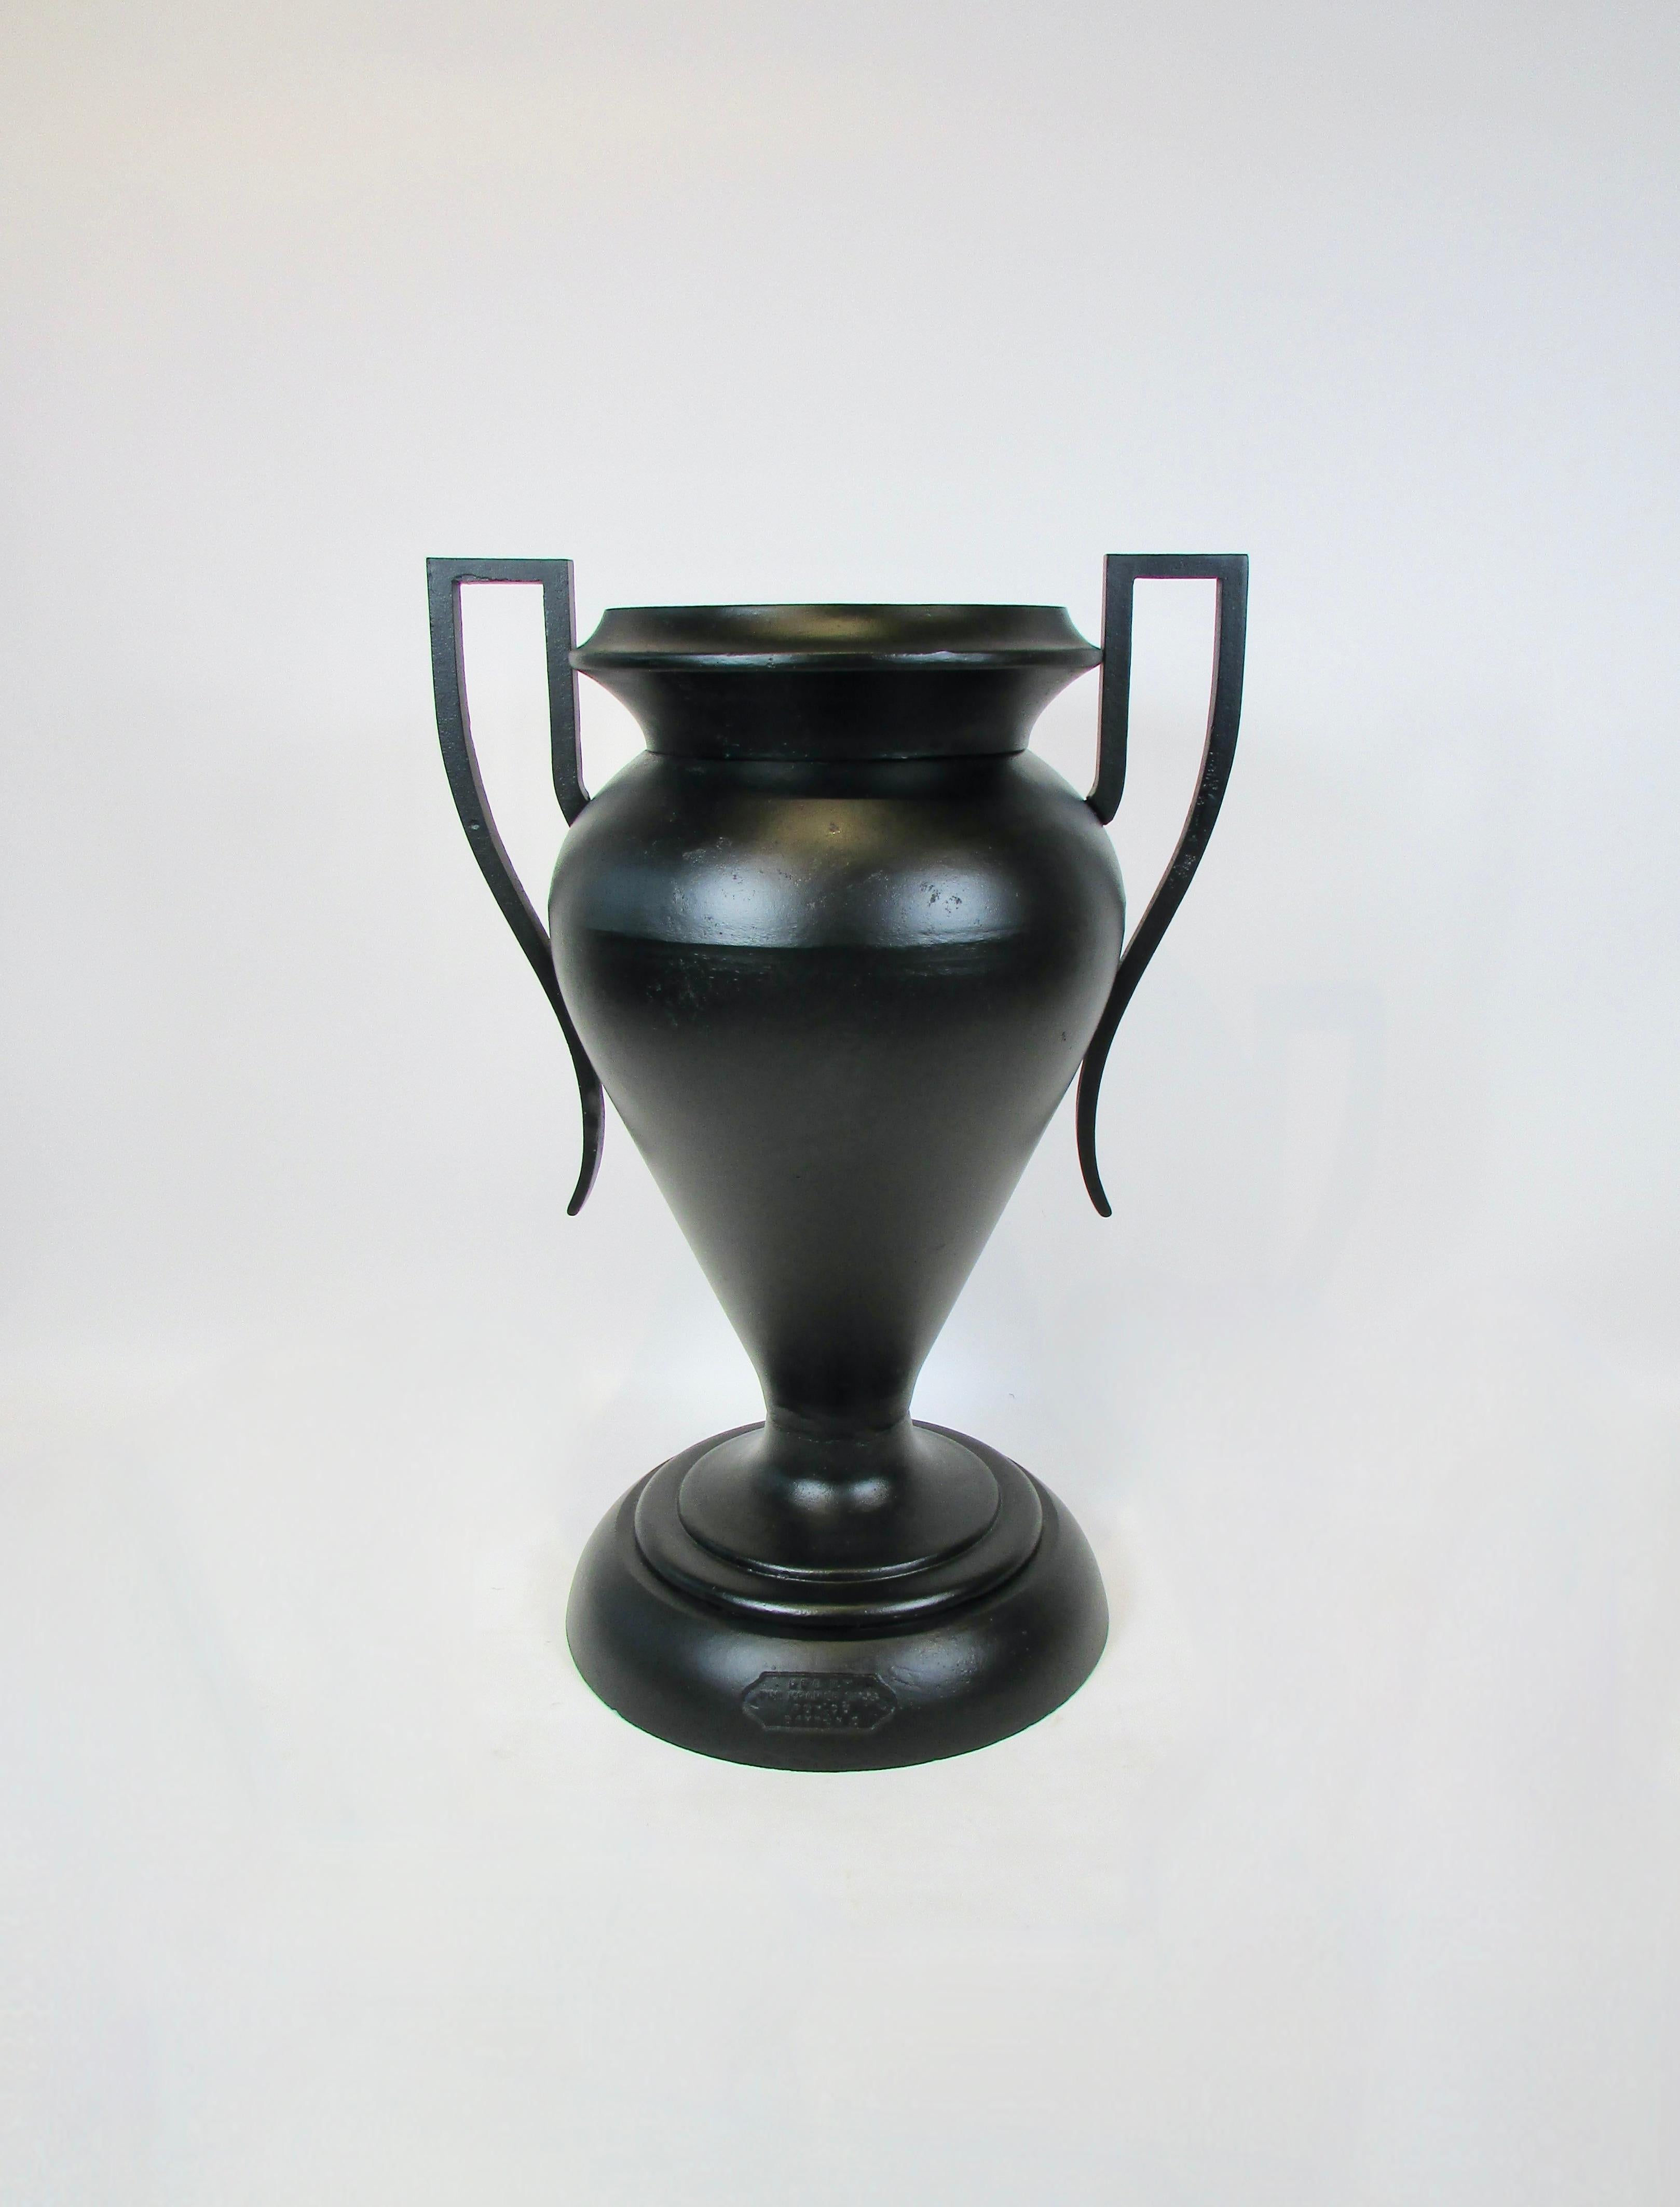 Monumental Kramer Brothers planter urn. Produced in three pieces base, main body and planter insert. Each piece media blasted and powder coated in Matte black finish. Measures 28